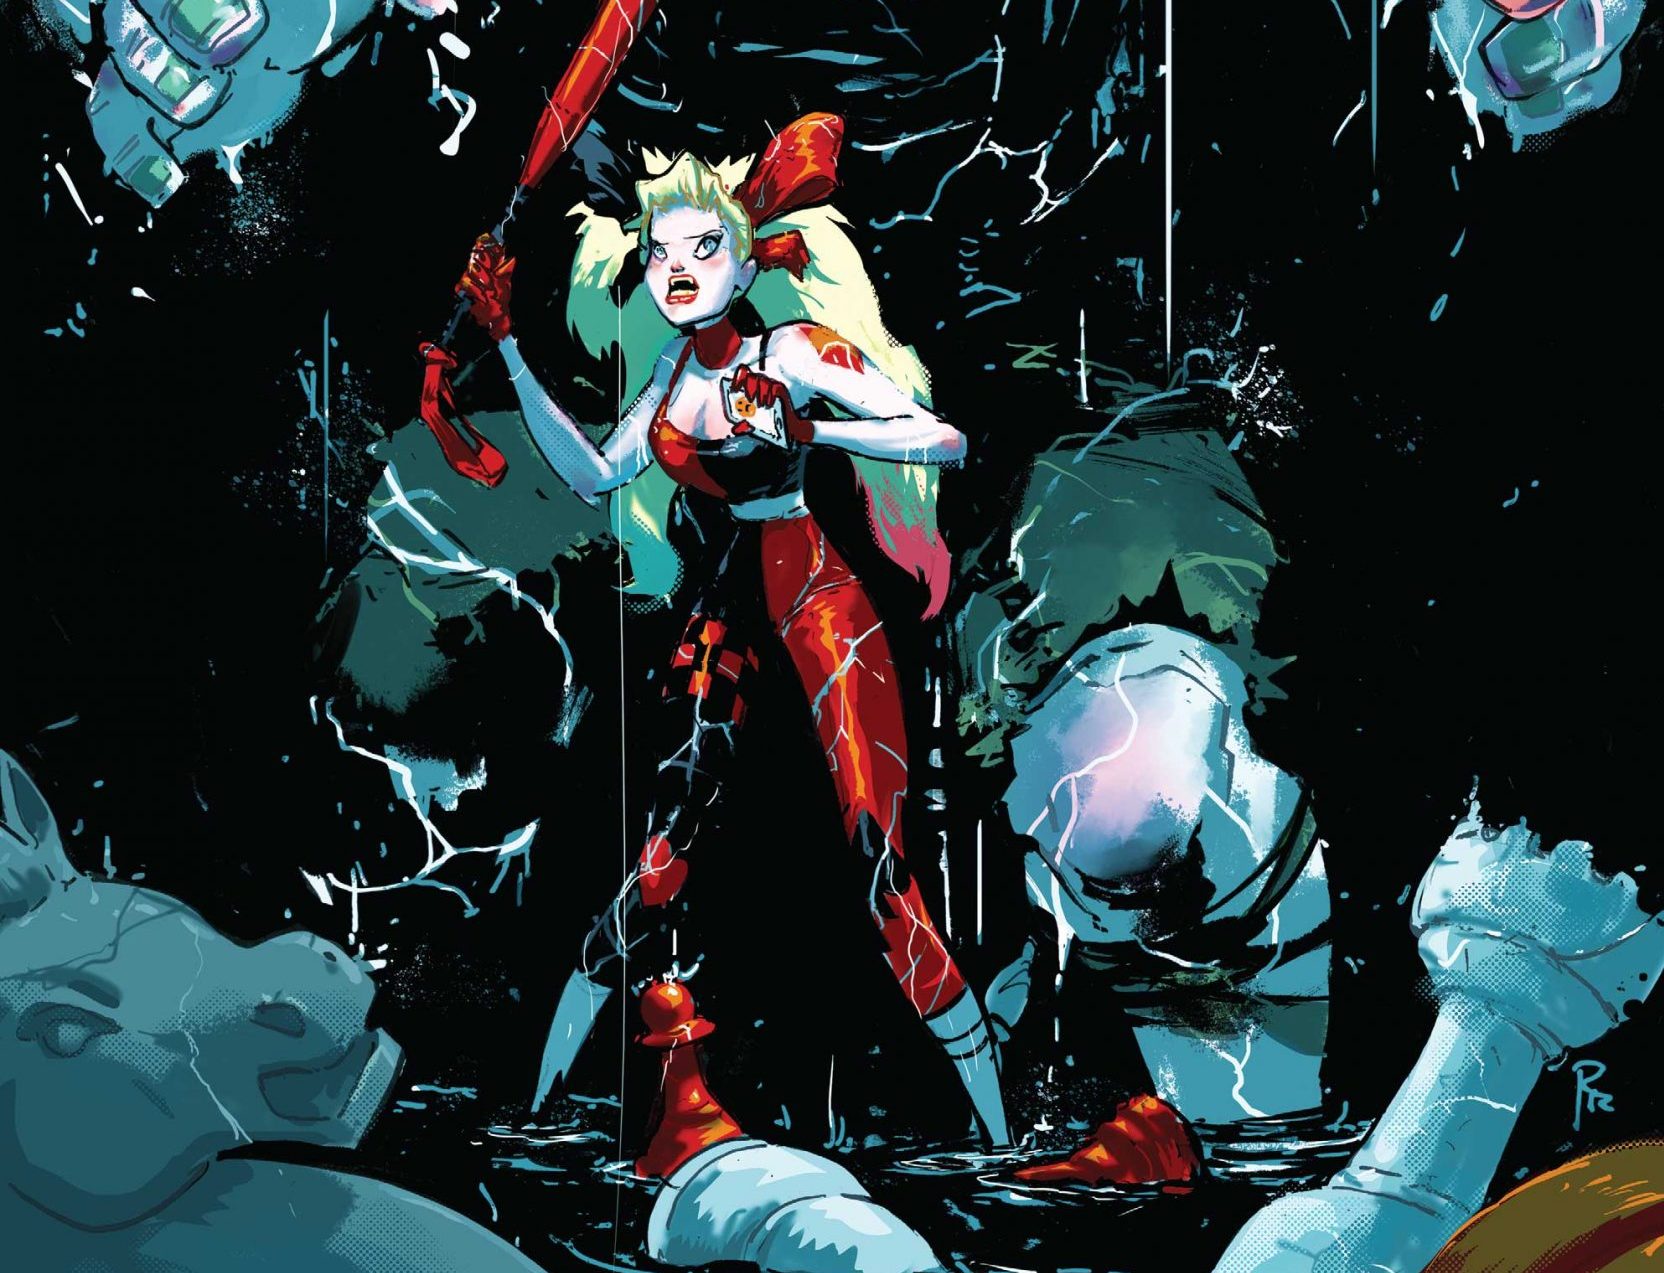 'Harley Quinn' #4 represents the perfect union between writer and artist